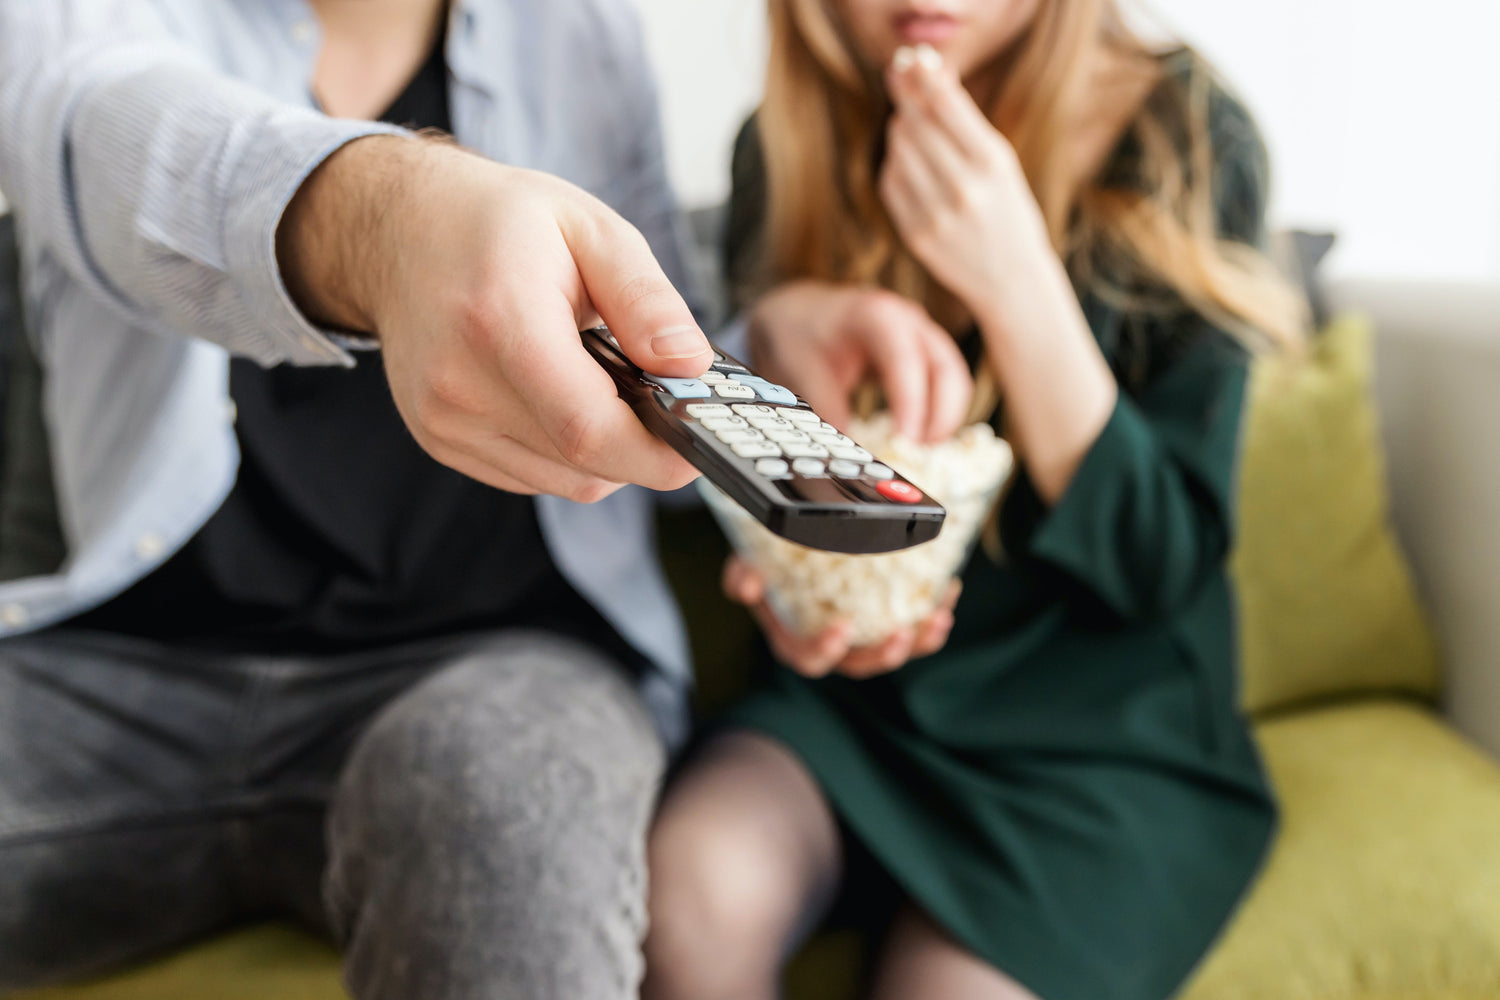 Are You Paying for Electricity Even When Your TV is Off?